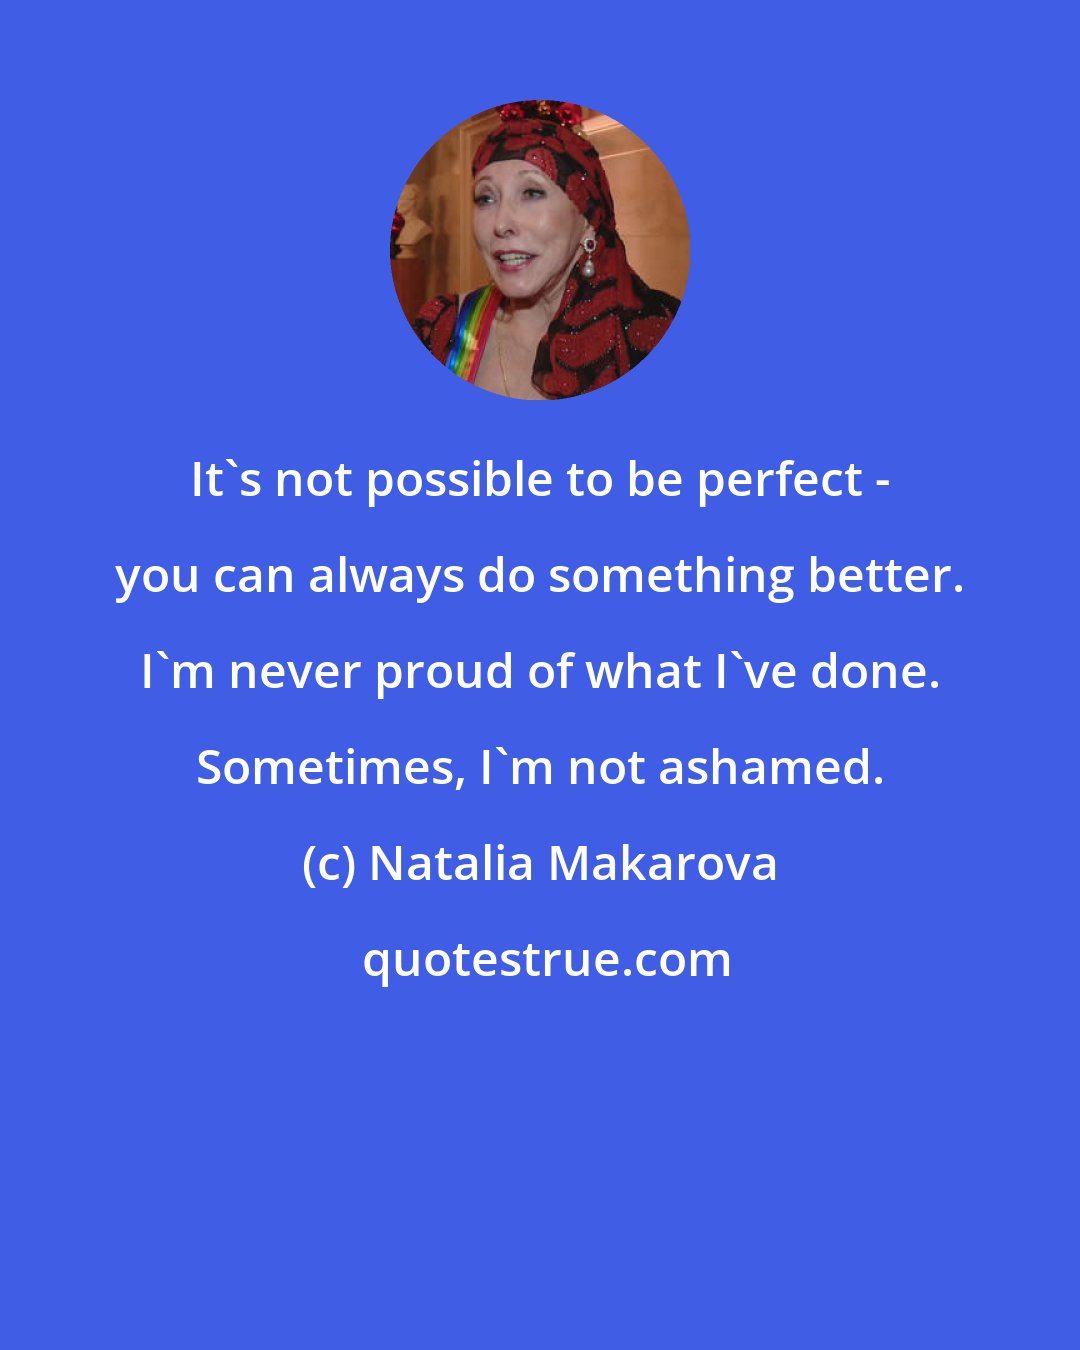 Natalia Makarova: It's not possible to be perfect - you can always do something better. I'm never proud of what I've done. Sometimes, I'm not ashamed.